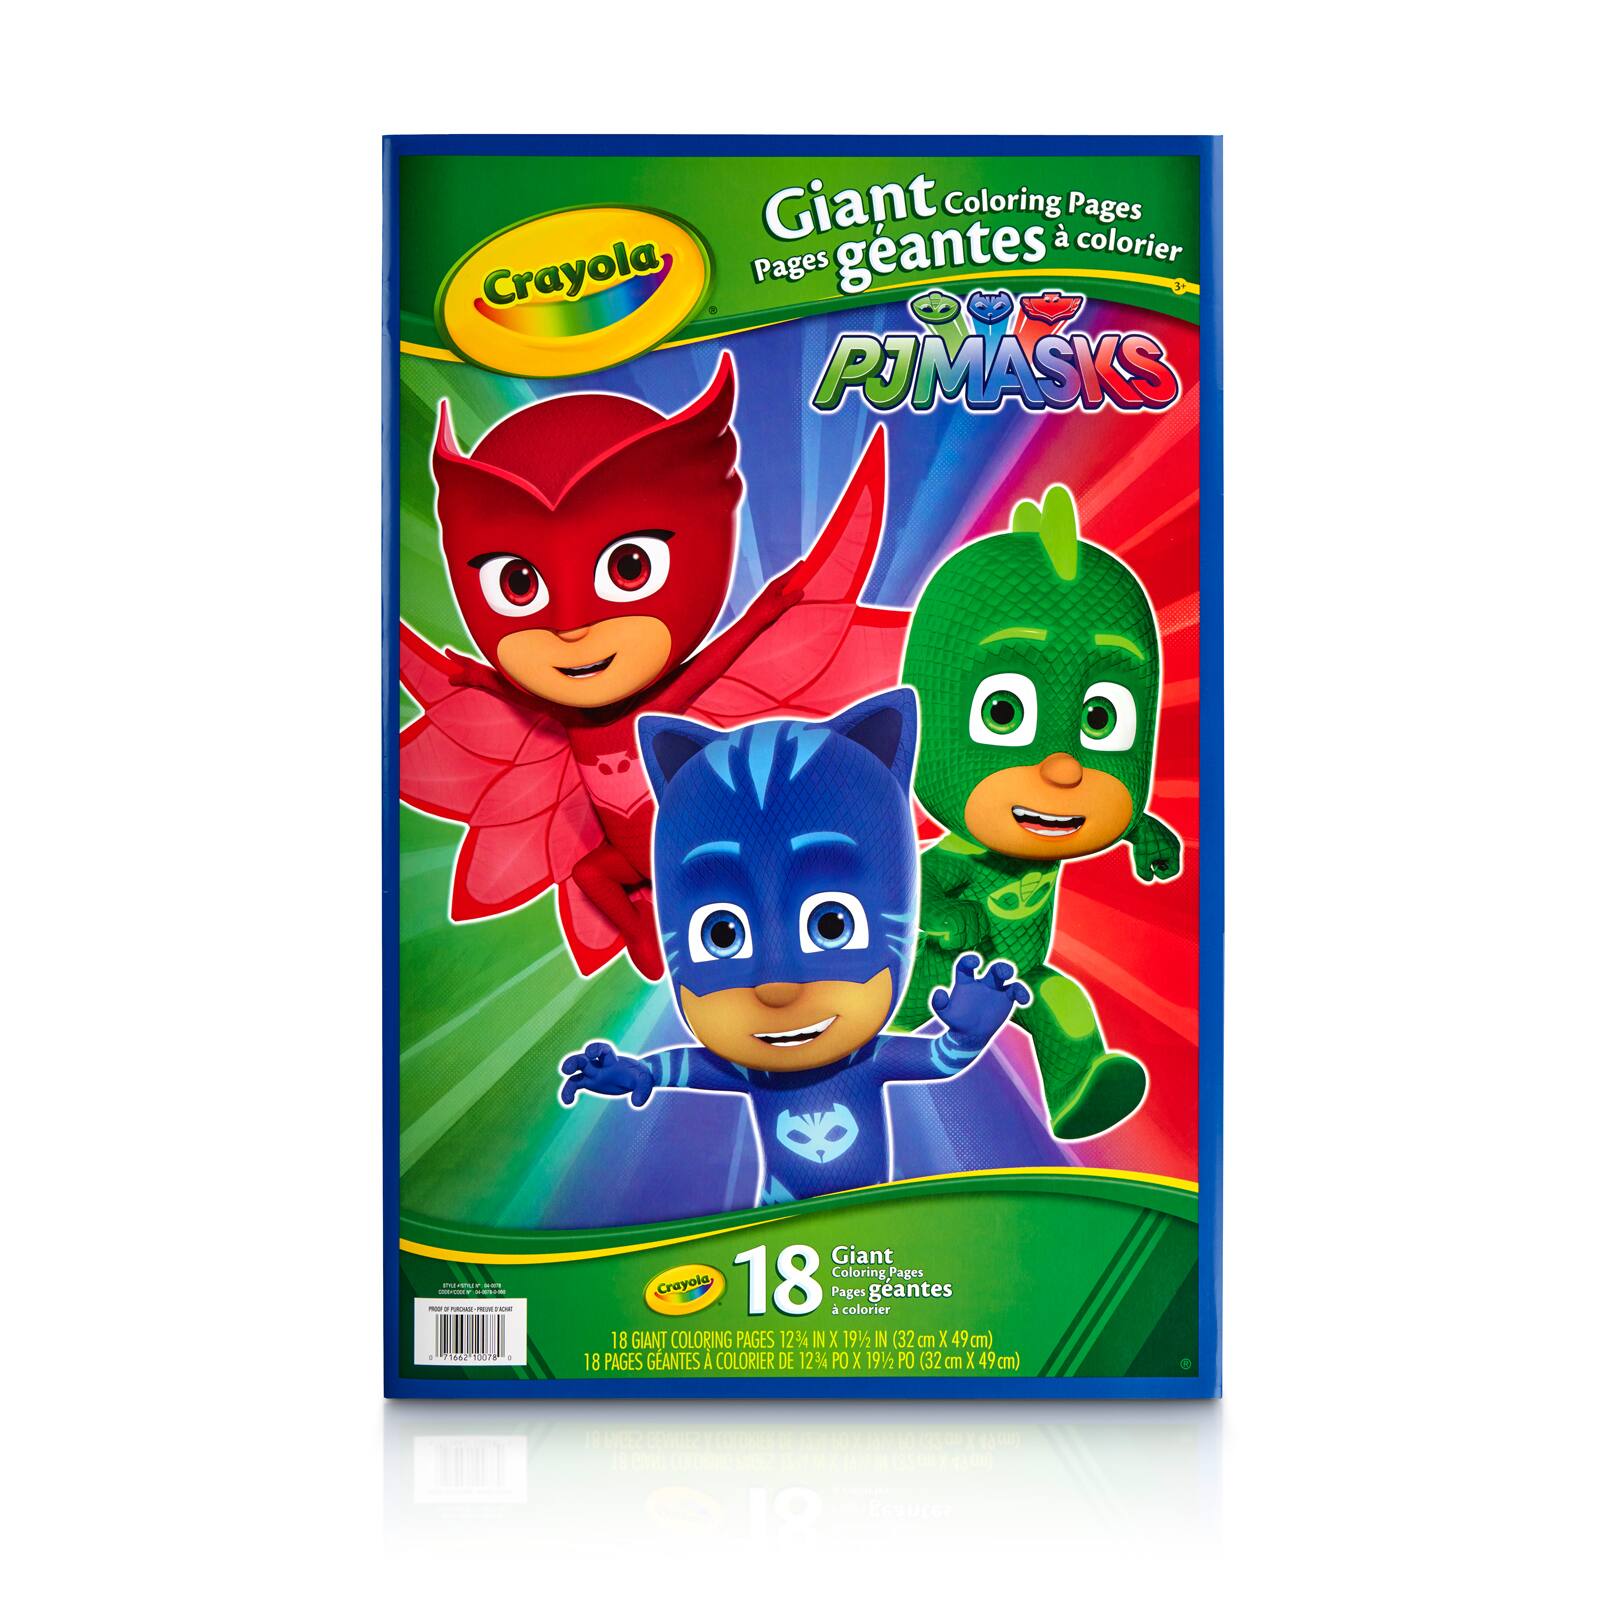 Download Shop for the Crayola® Giant Coloring Pages, PJ Masks at Michaels